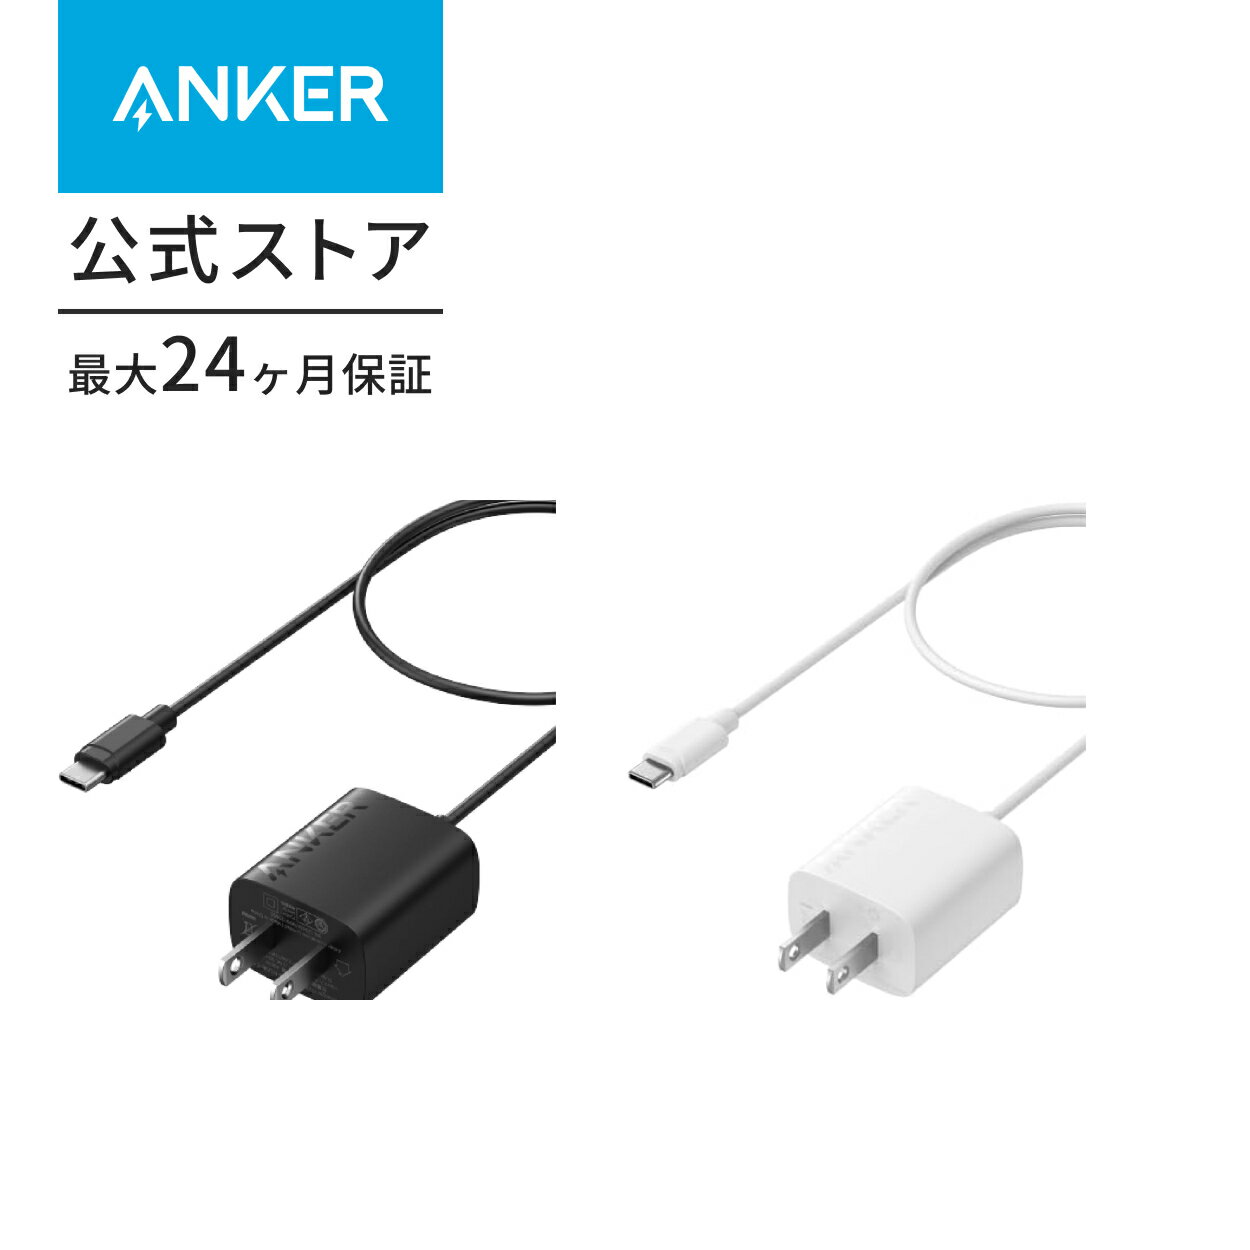 Anker Charger (12W, Built-In 1.5m USB-C ケーブル) (USB 充電器 12W USB-C USB-C ケーブル一体型)【PSE技術基準適合】 iPhone 15 iPad Air Galaxy Android その他 各種機器対応